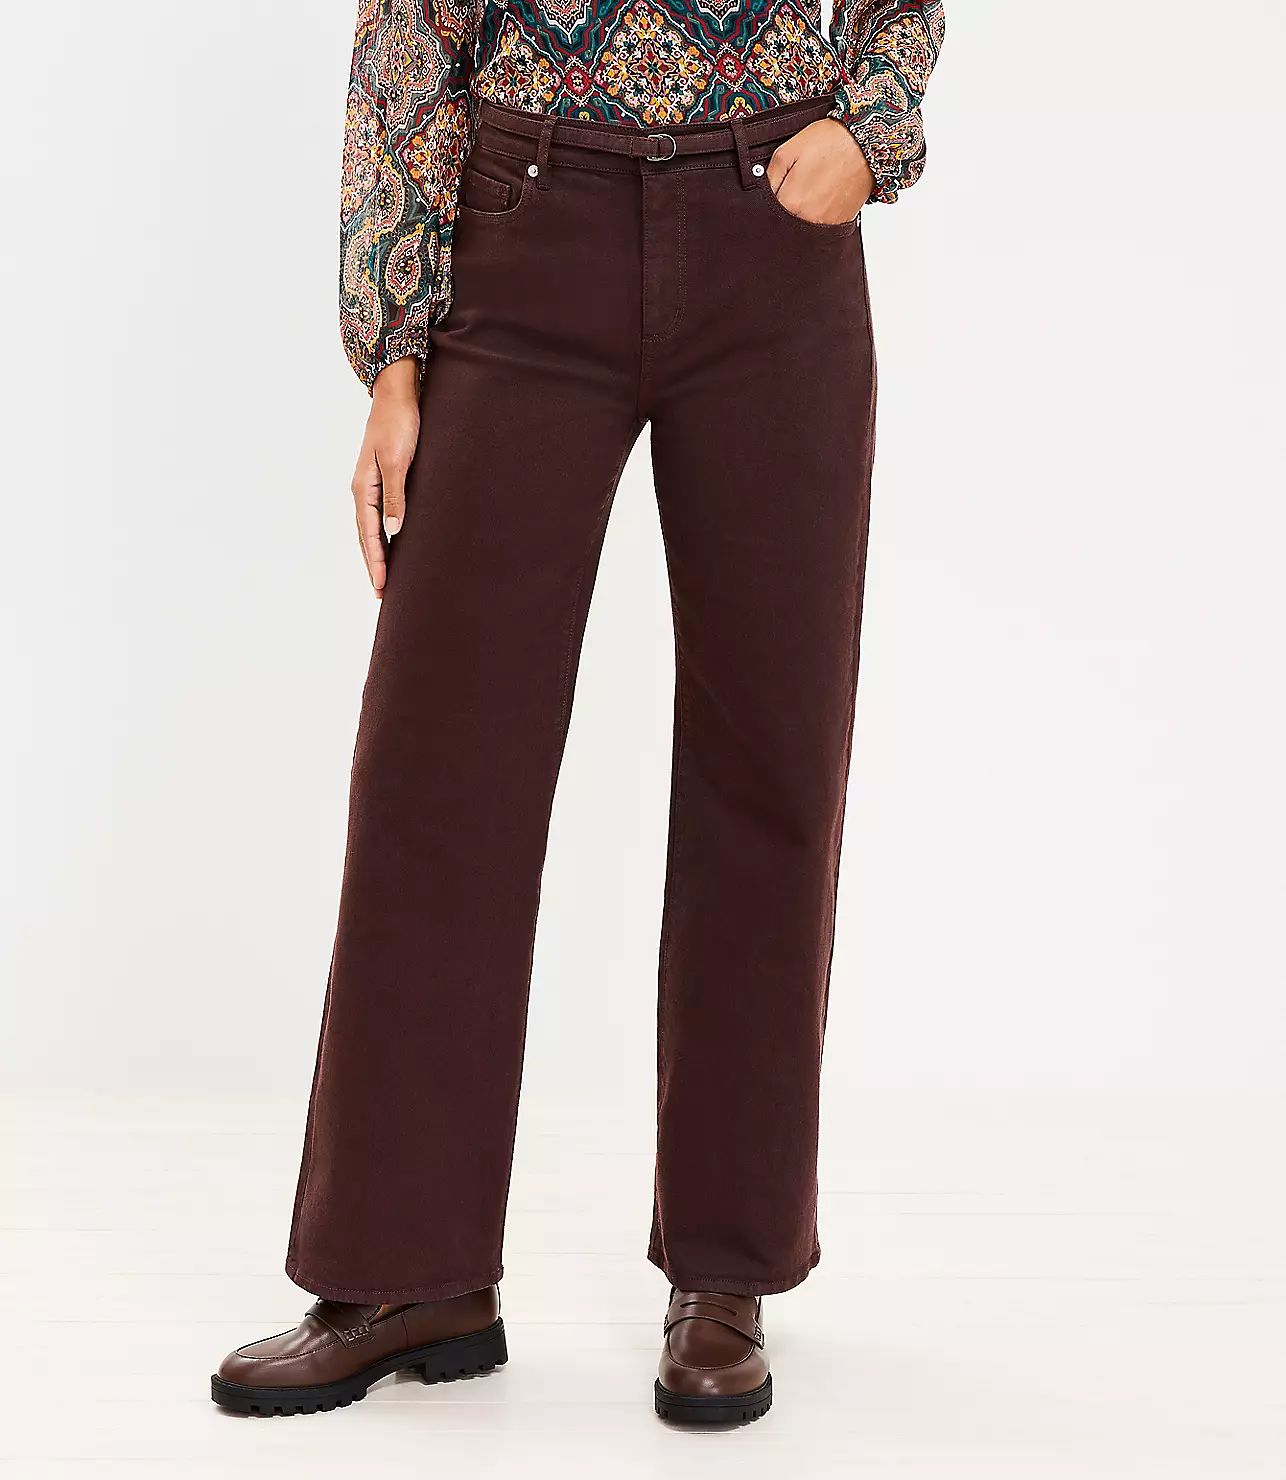 Belted High Rise Wide Leg Jeans in Iced Espresso | LOFT